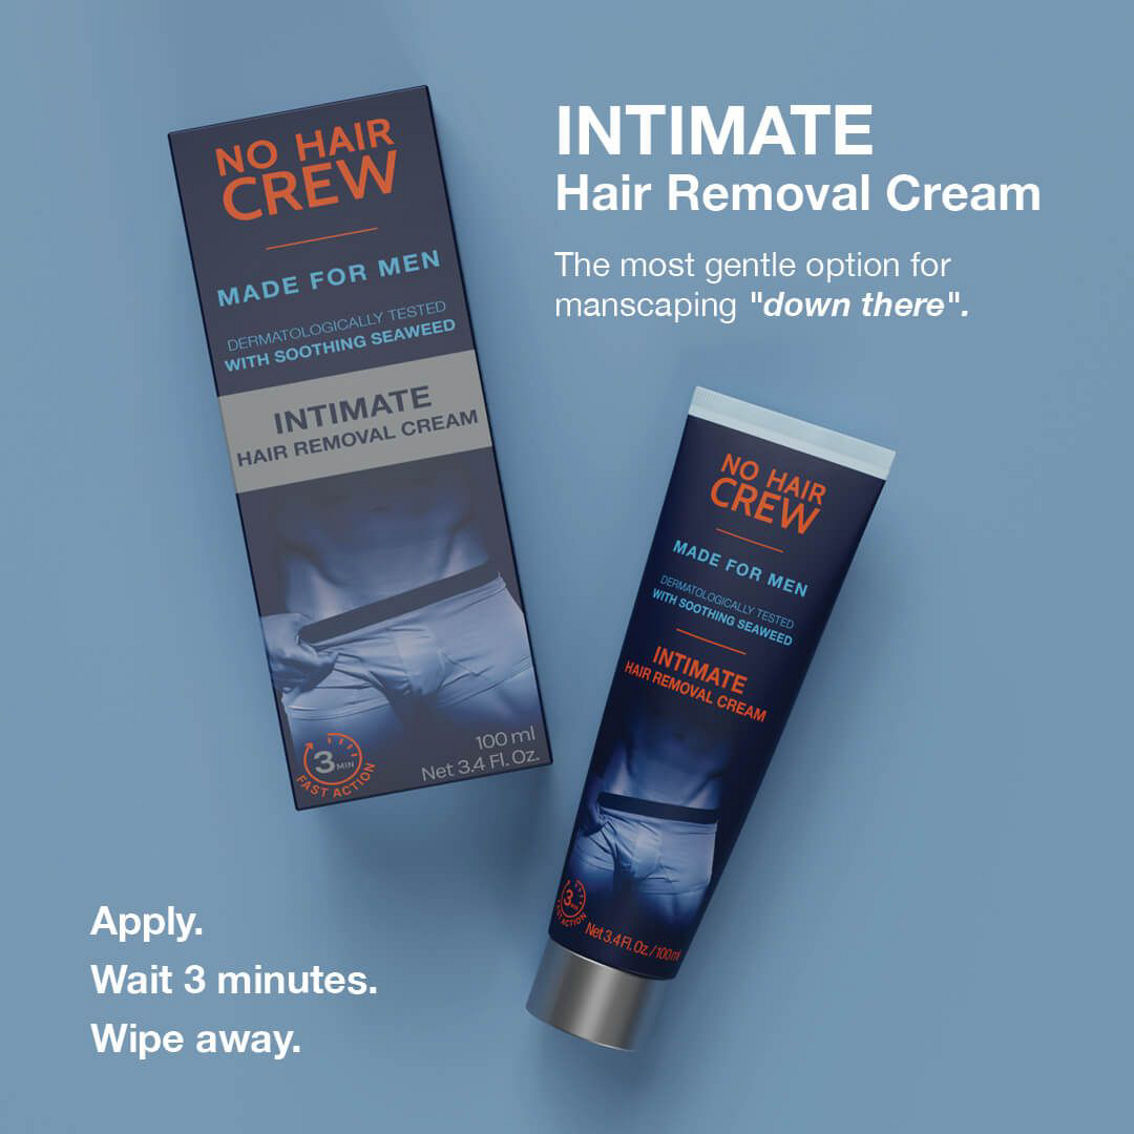 No Hair Crew Intimate Hair Removal Cream 2-Pack - Image 4 of 4